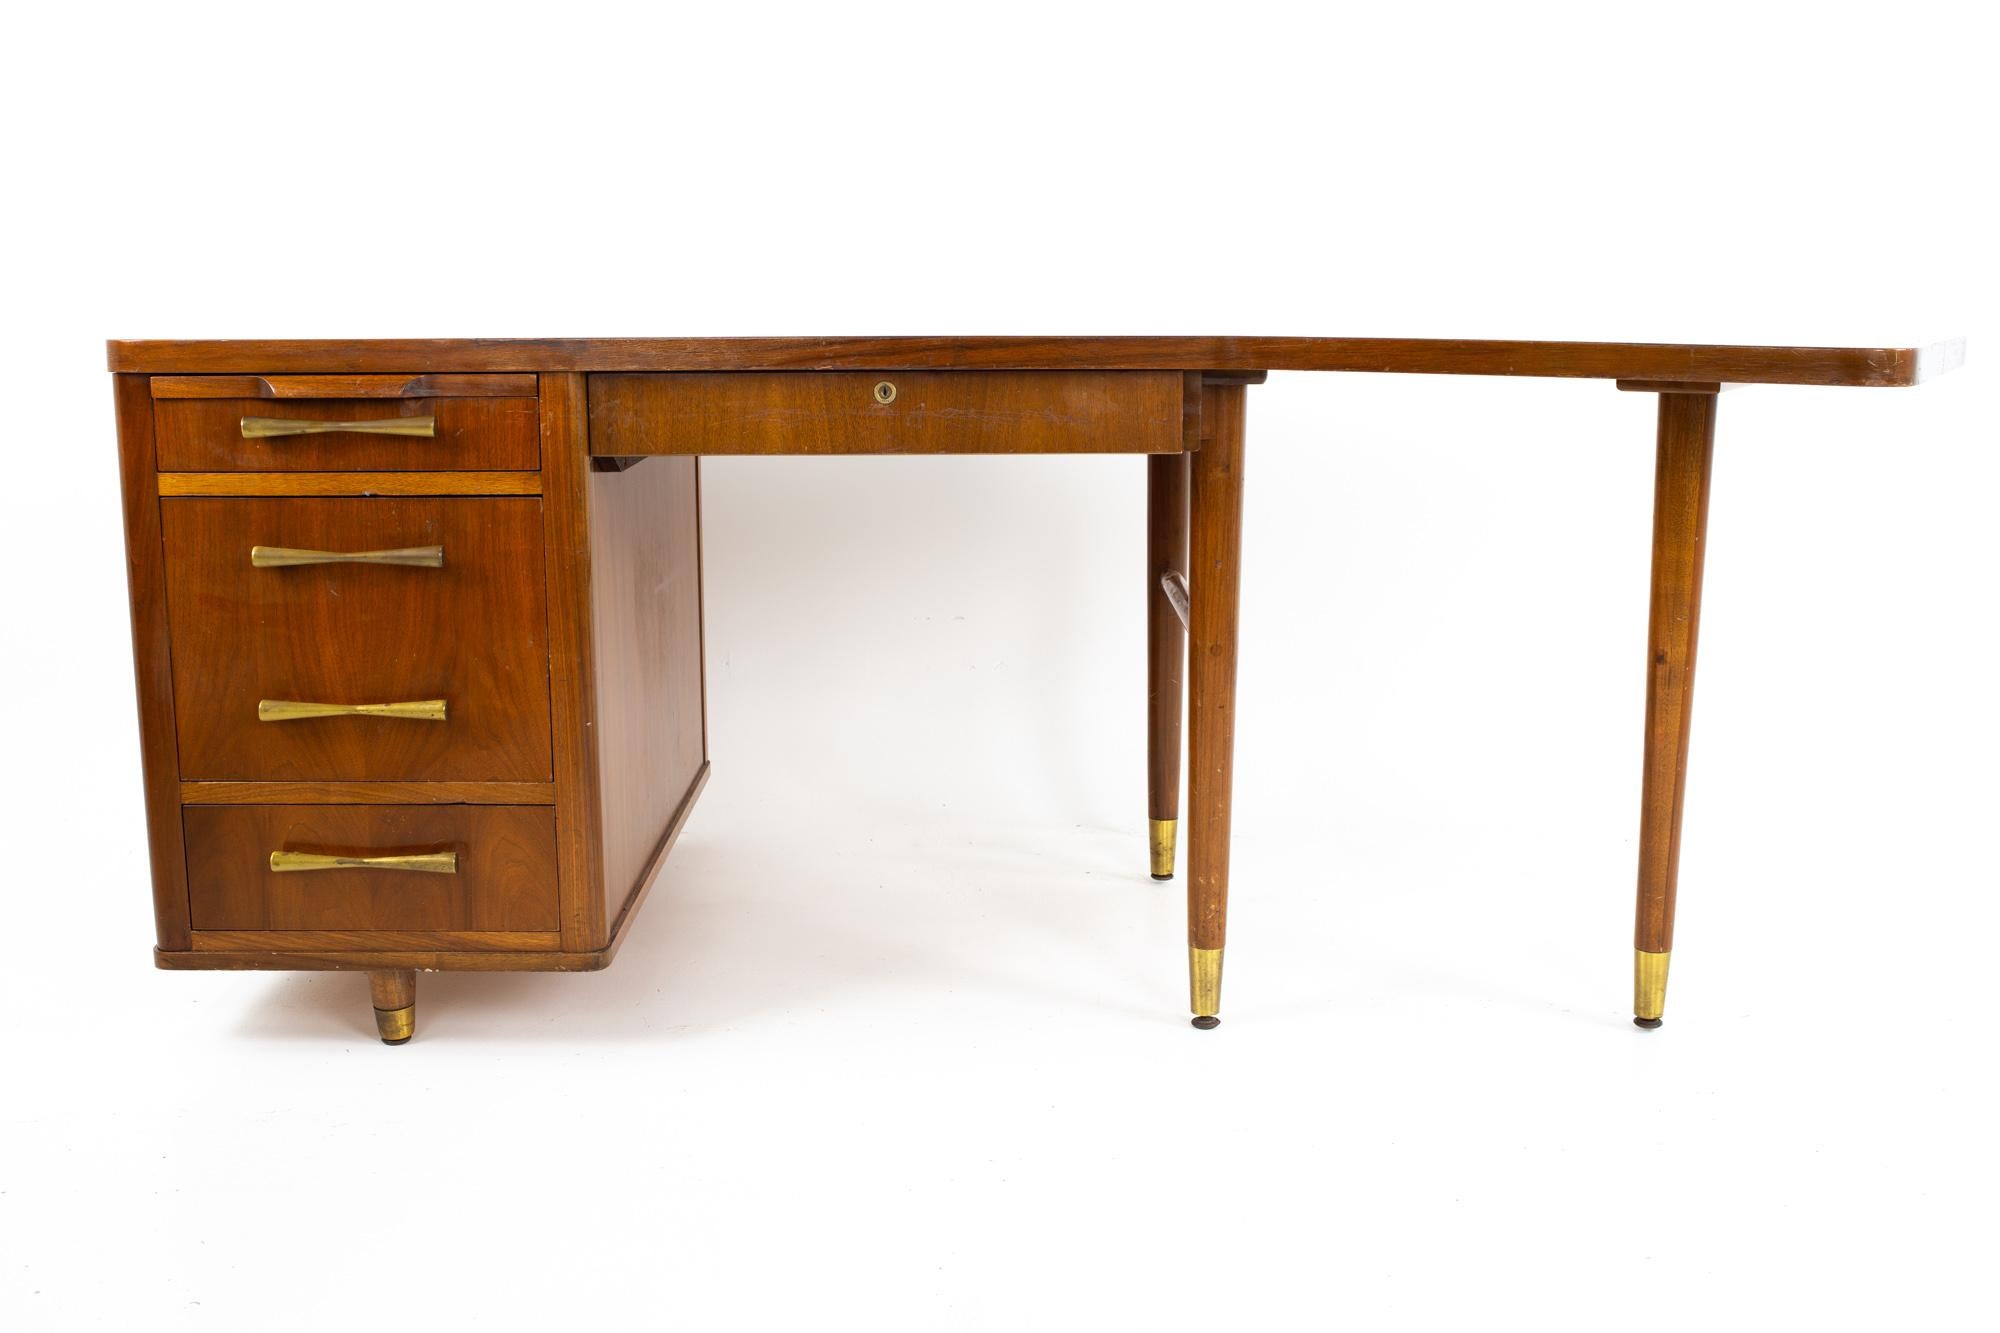 Stow Davis mid century walnut and brass boomerang desk

Desk measures: 80 wide x 35.5 deep x 29 inches high with a chair clearance of 27.75 inches

All pieces of furniture can be had in what we call restored vintage condition. That means the